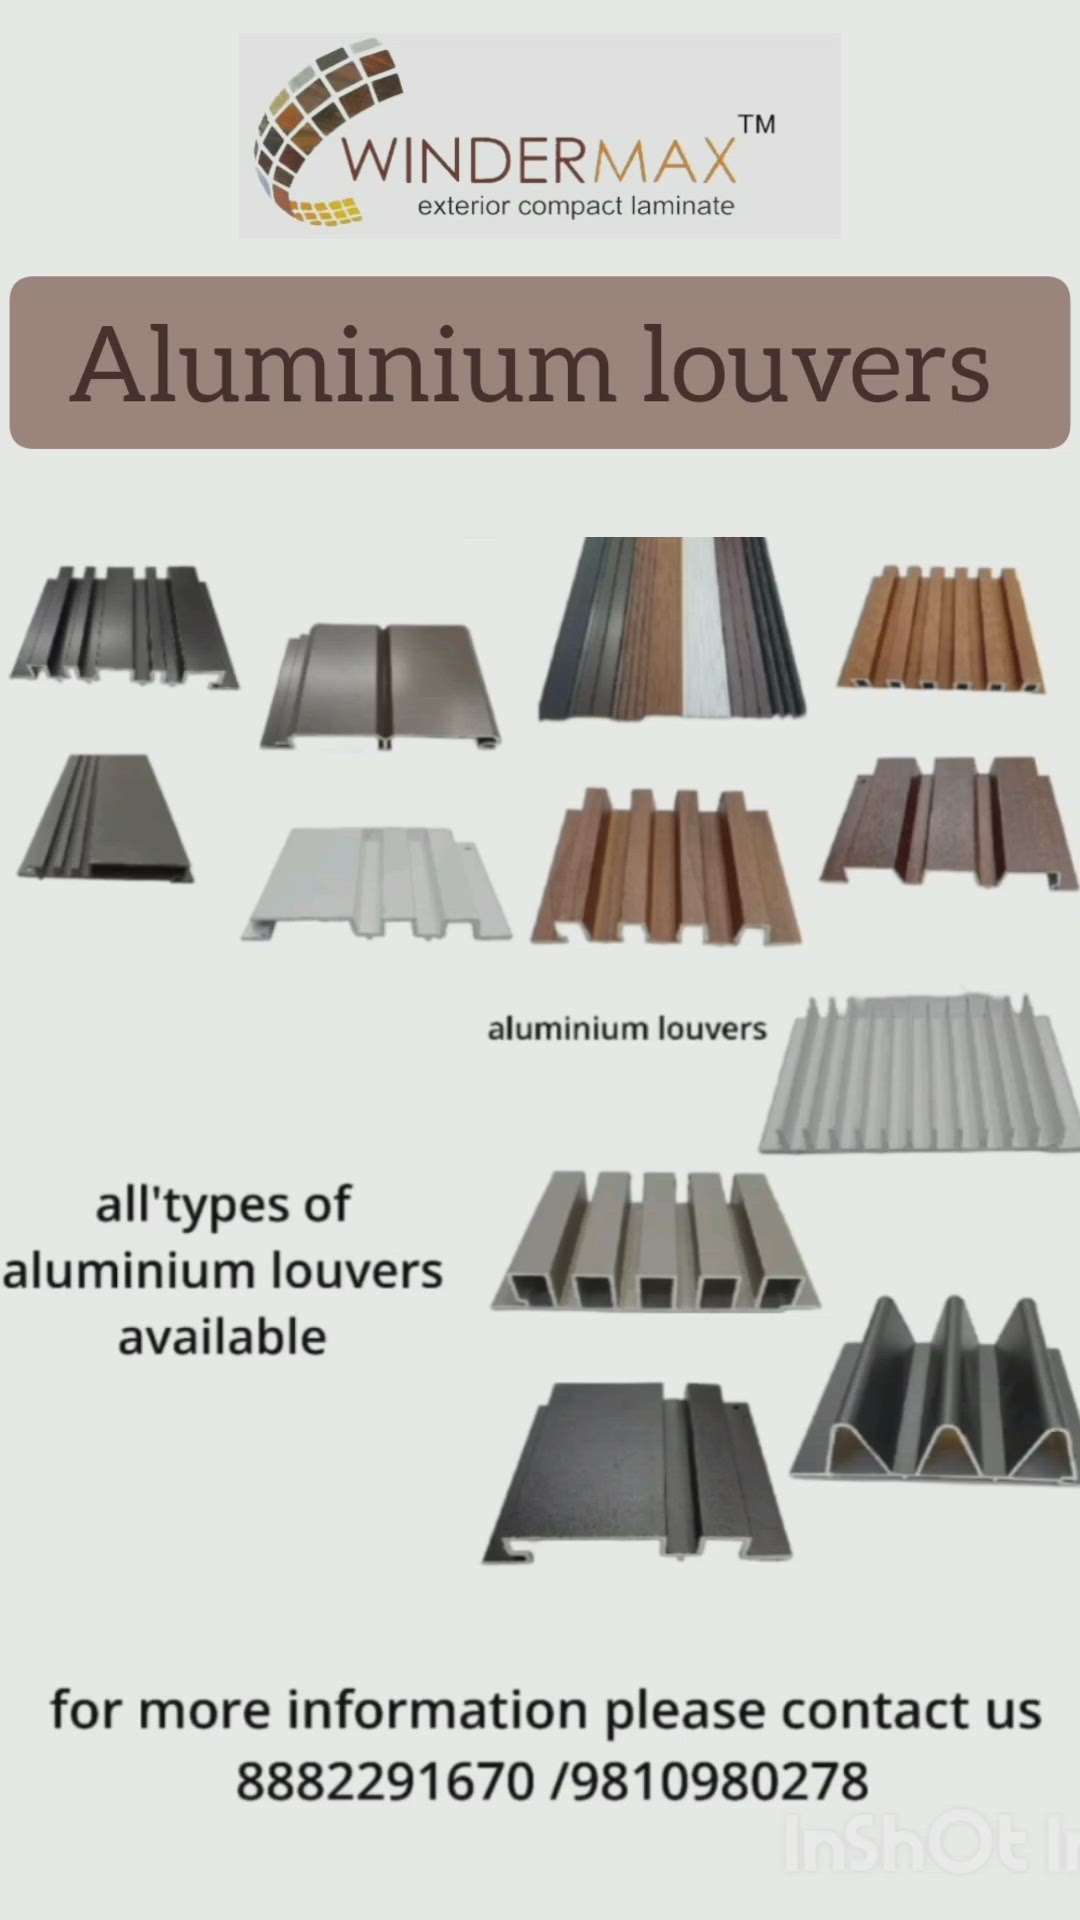 𝙂𝙚𝙩 𝙖 𝙘𝙡𝙖𝙨𝙨𝙞𝙘 𝙡𝙤𝙤𝙠 𝙛𝙤𝙧 𝙮𝙤𝙪𝙧 𝙚𝙭𝙩𝙚𝙧𝙞𝙤𝙧
.
.
Aluminum louvers
at just 270 per sqft
. 
. 
#aluminium #aluminium louvers #exterior #exteriorelevation #elevation #modernexterior #exteriordesigner #louvers #modernelevation 
. 
. 
Stay connected for more information
. 
. 
www.windermaxindia.com
info@windermaxindia.com
Or call us on 9810980278, 9810980636